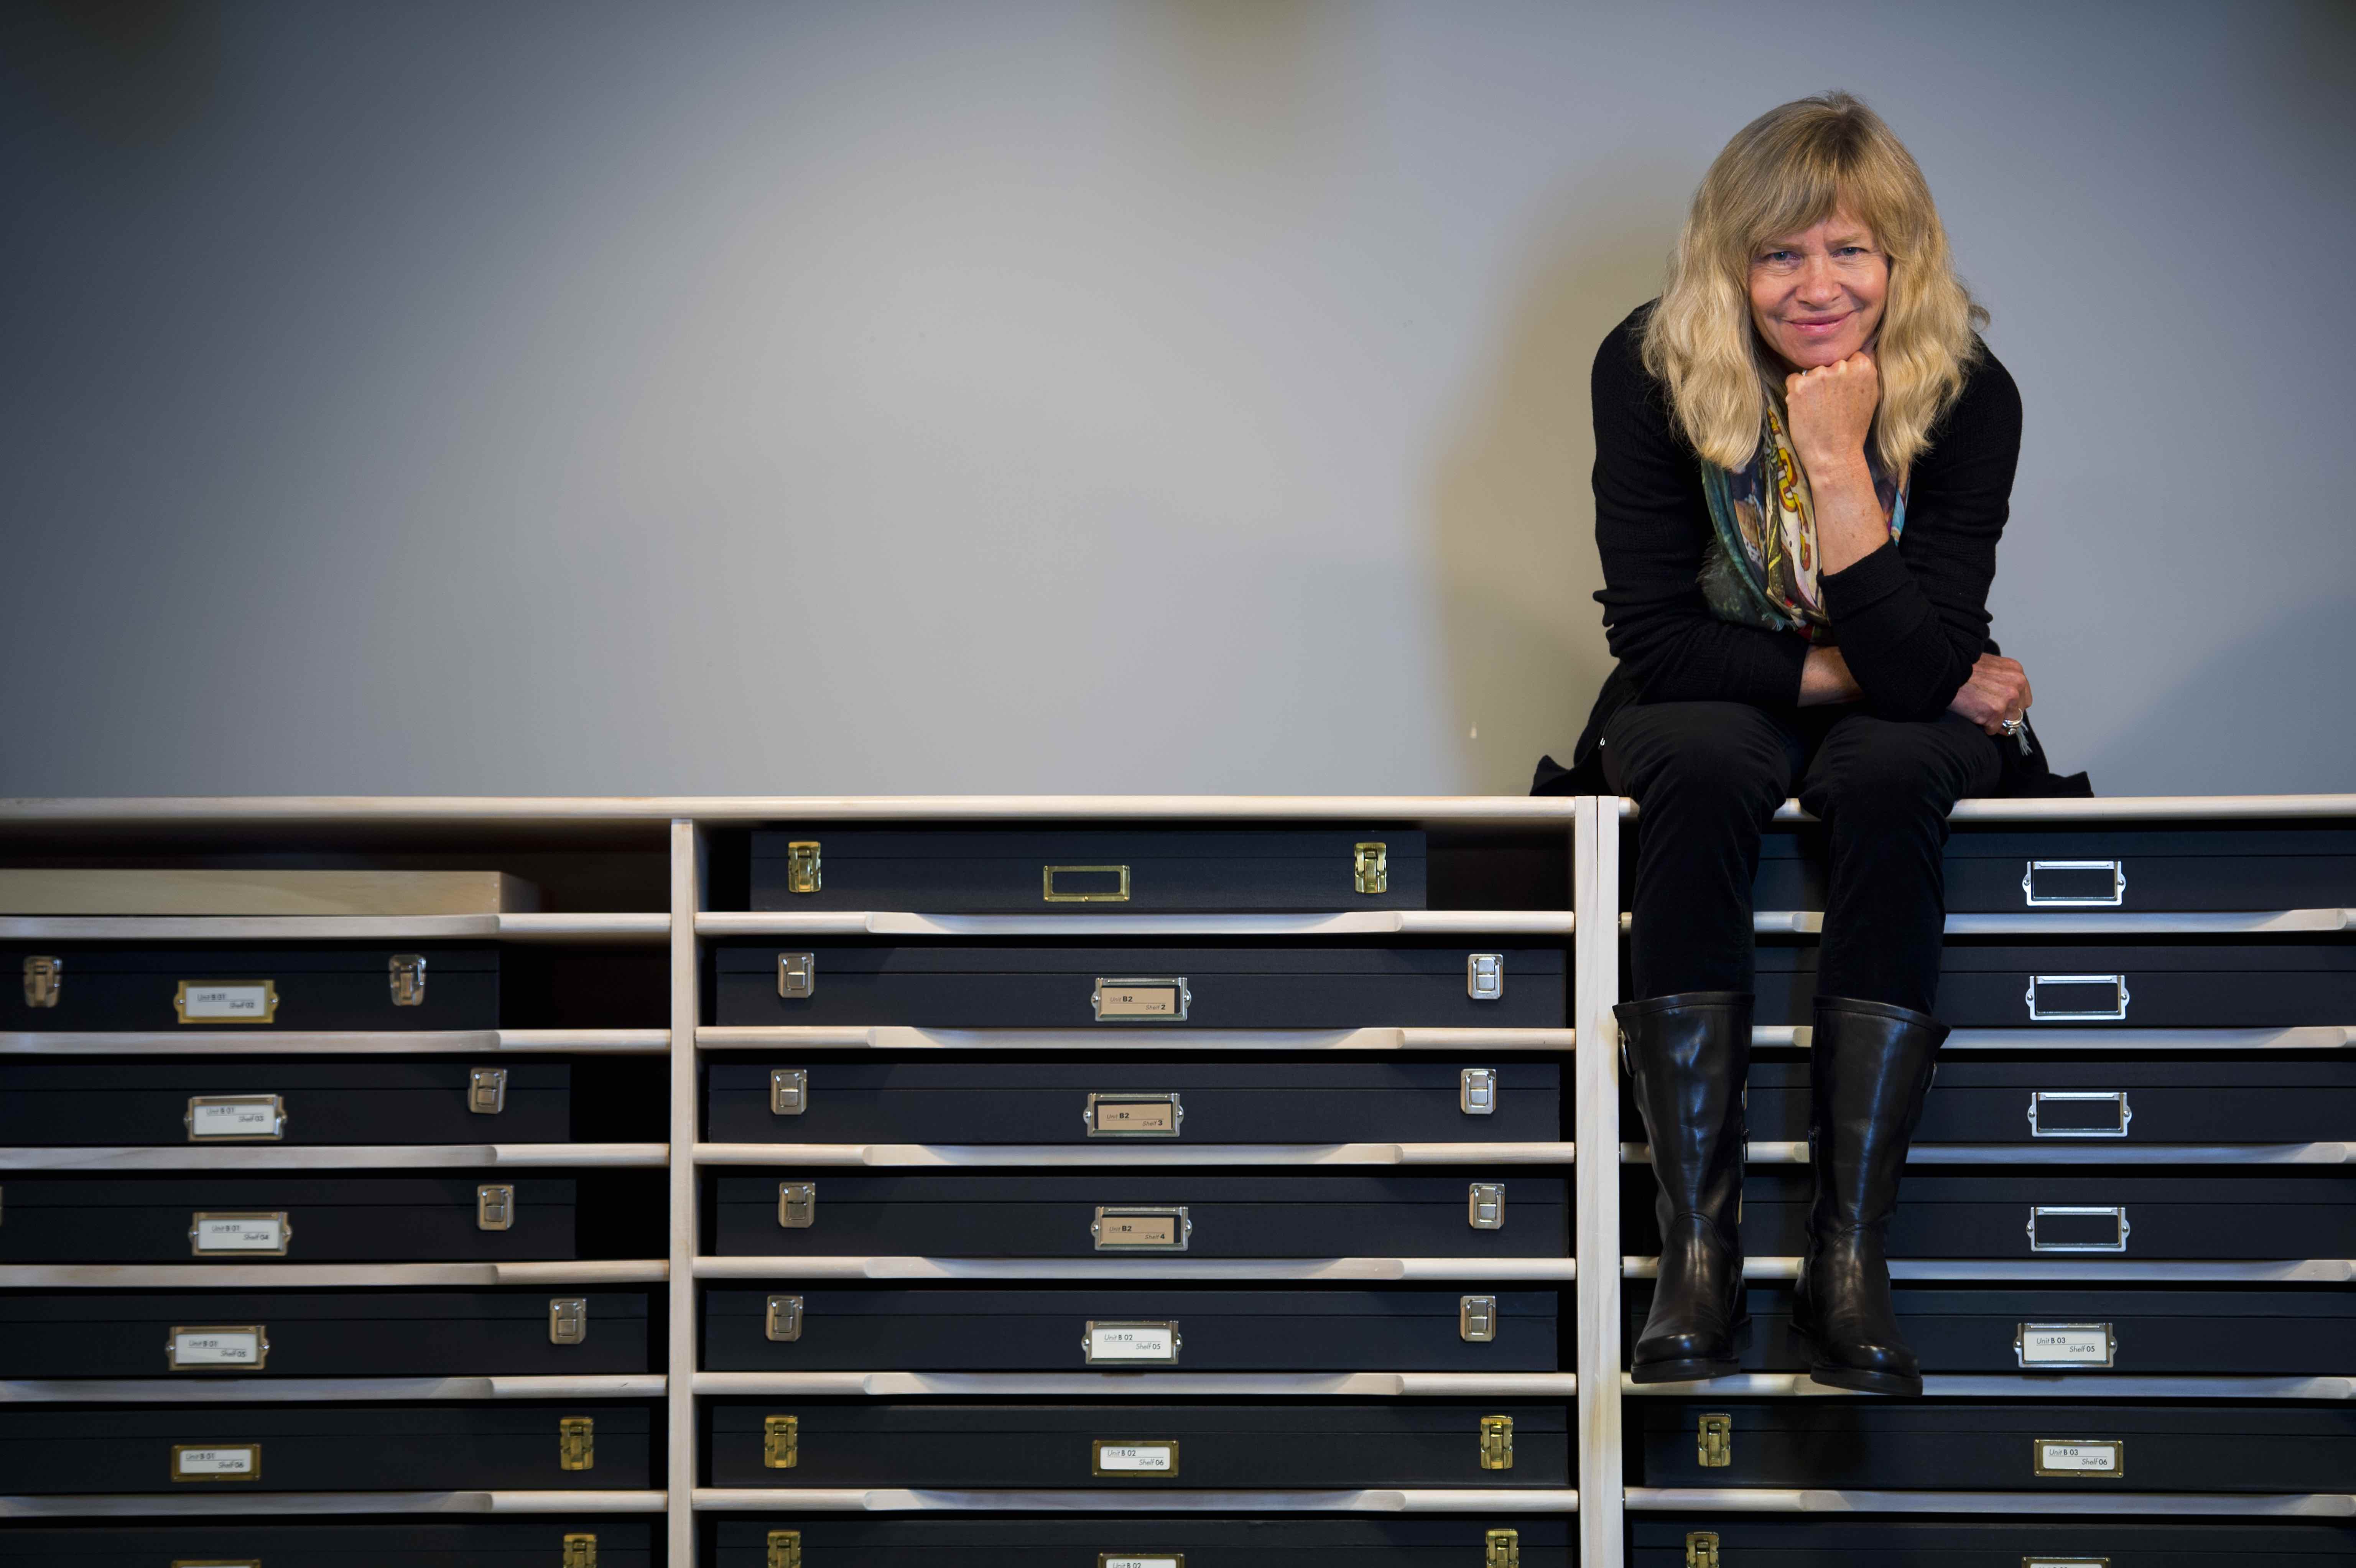 Woman sits on top of a shelving unit holding boxes. 